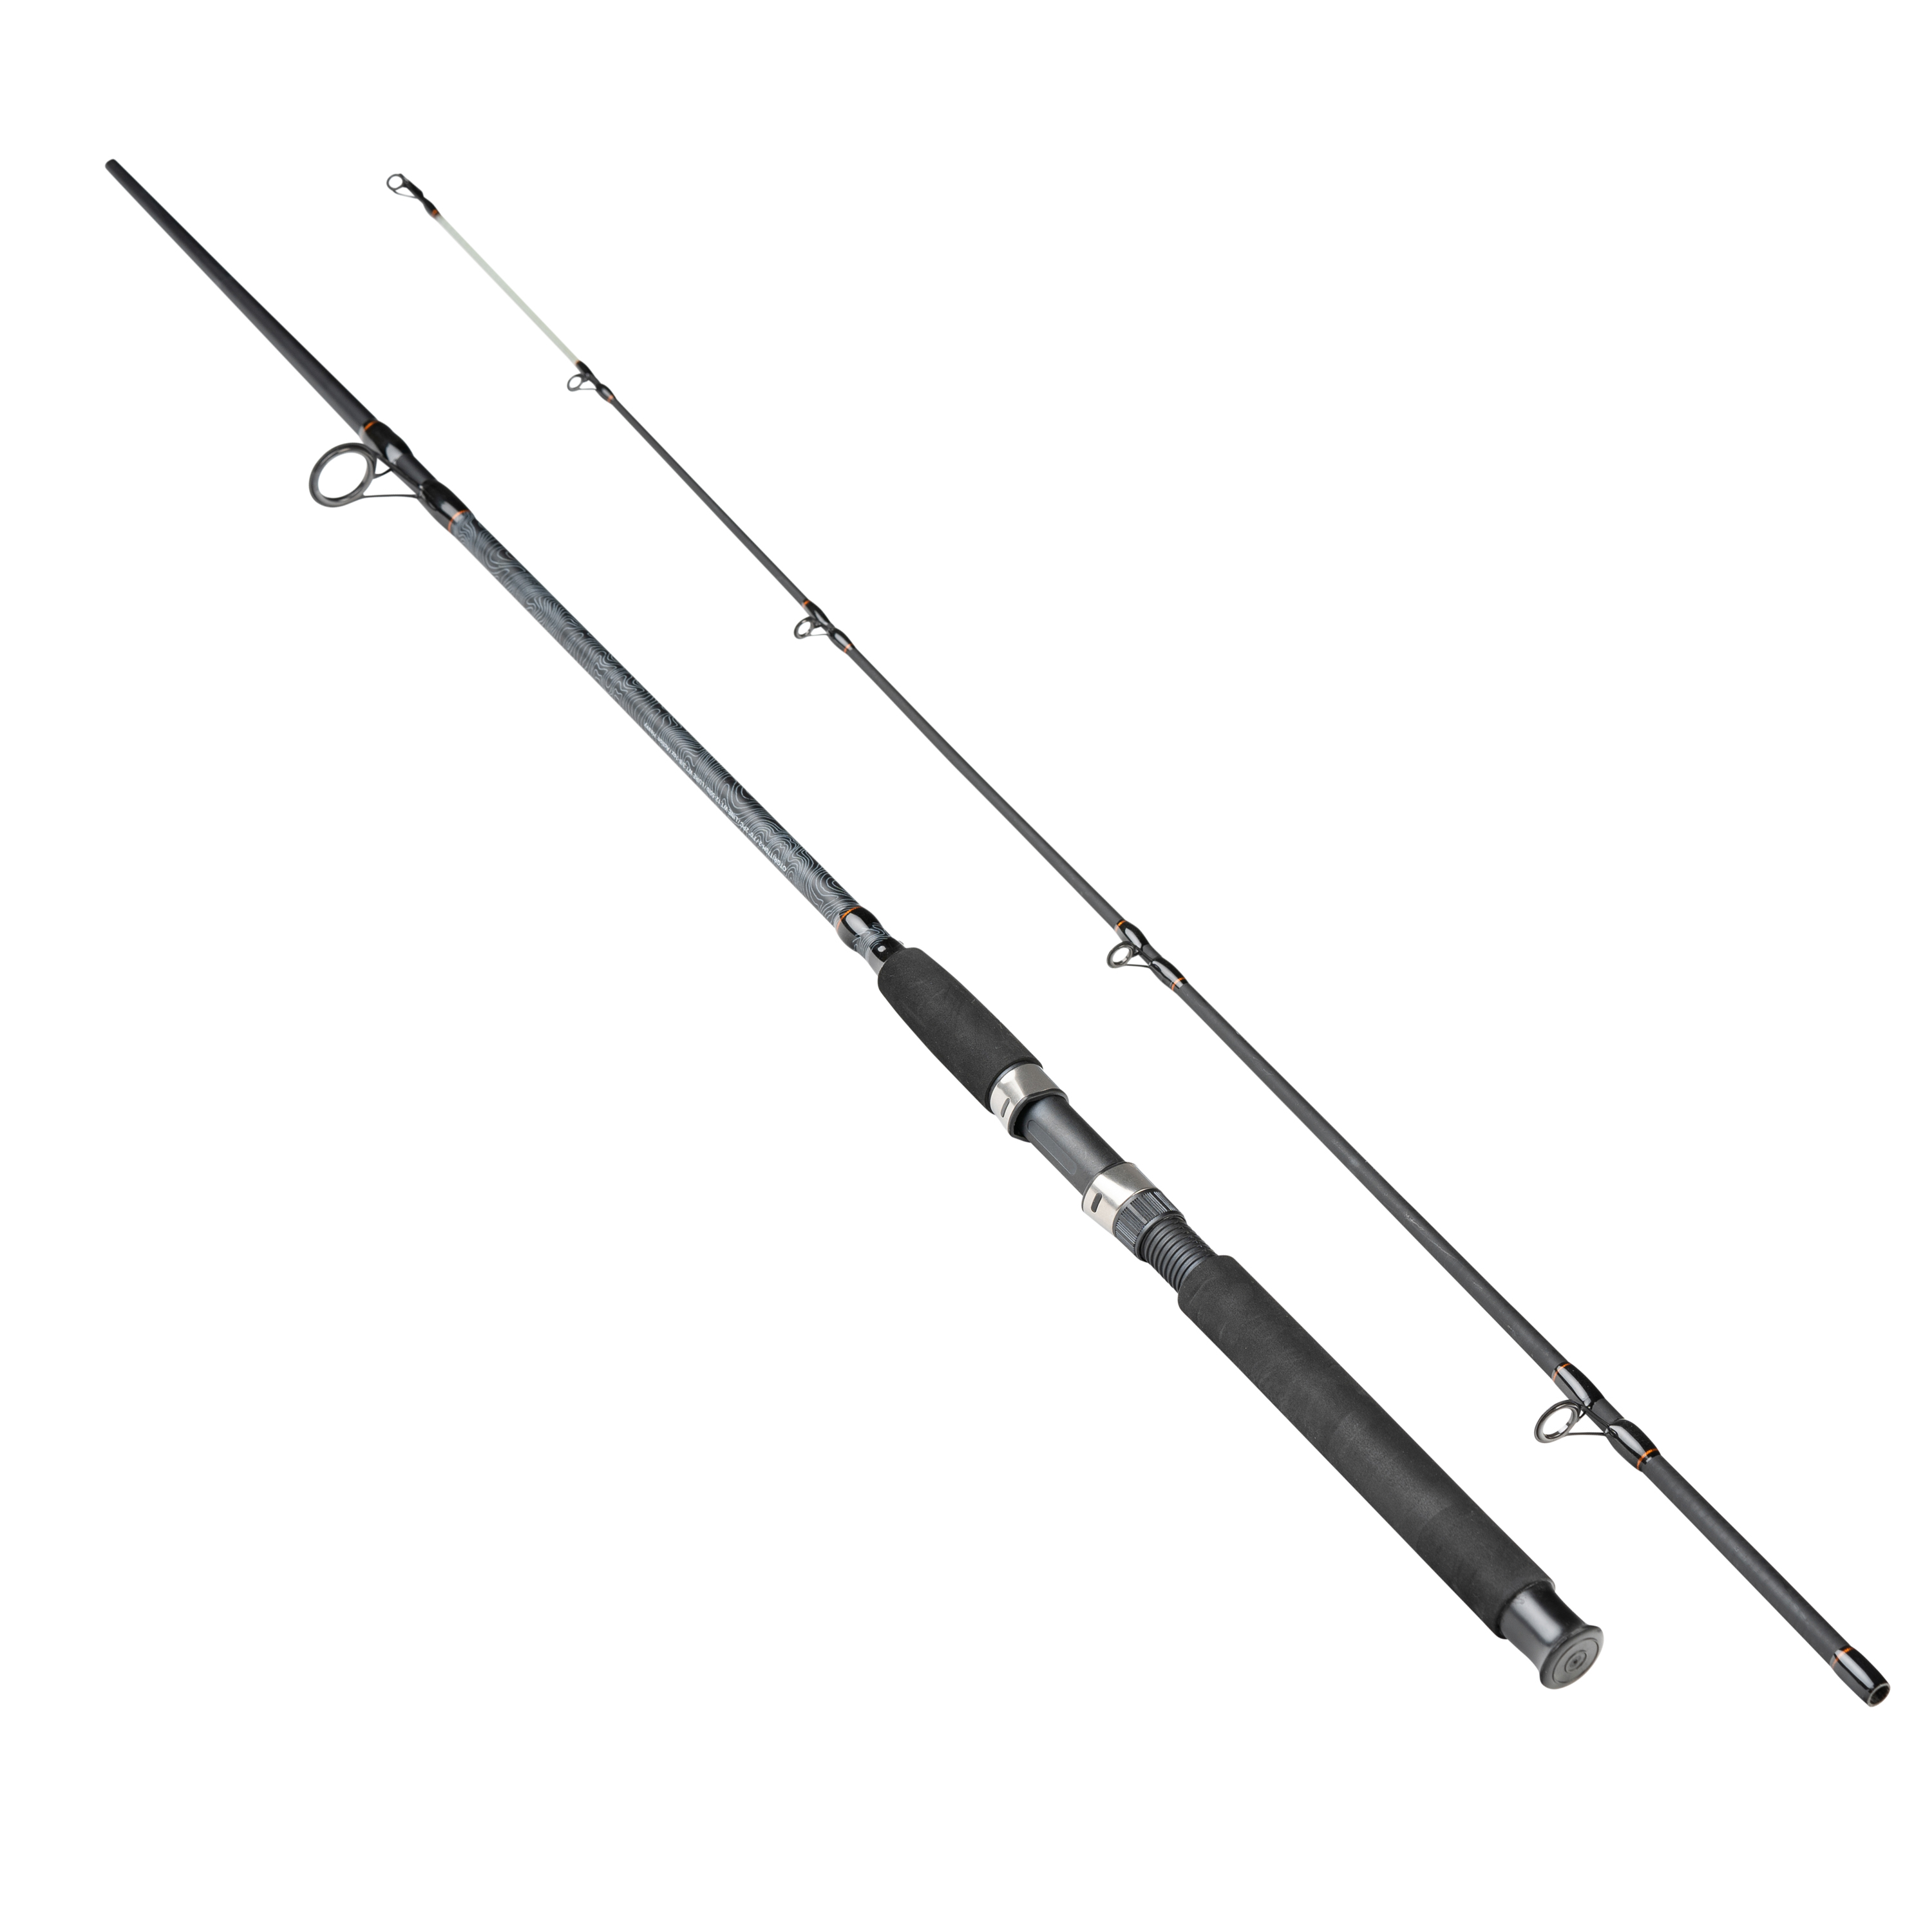 Ozark Trail Grit Stick Spinning Fishing Rod, Heavy Action, 7ft - image 2 of 7